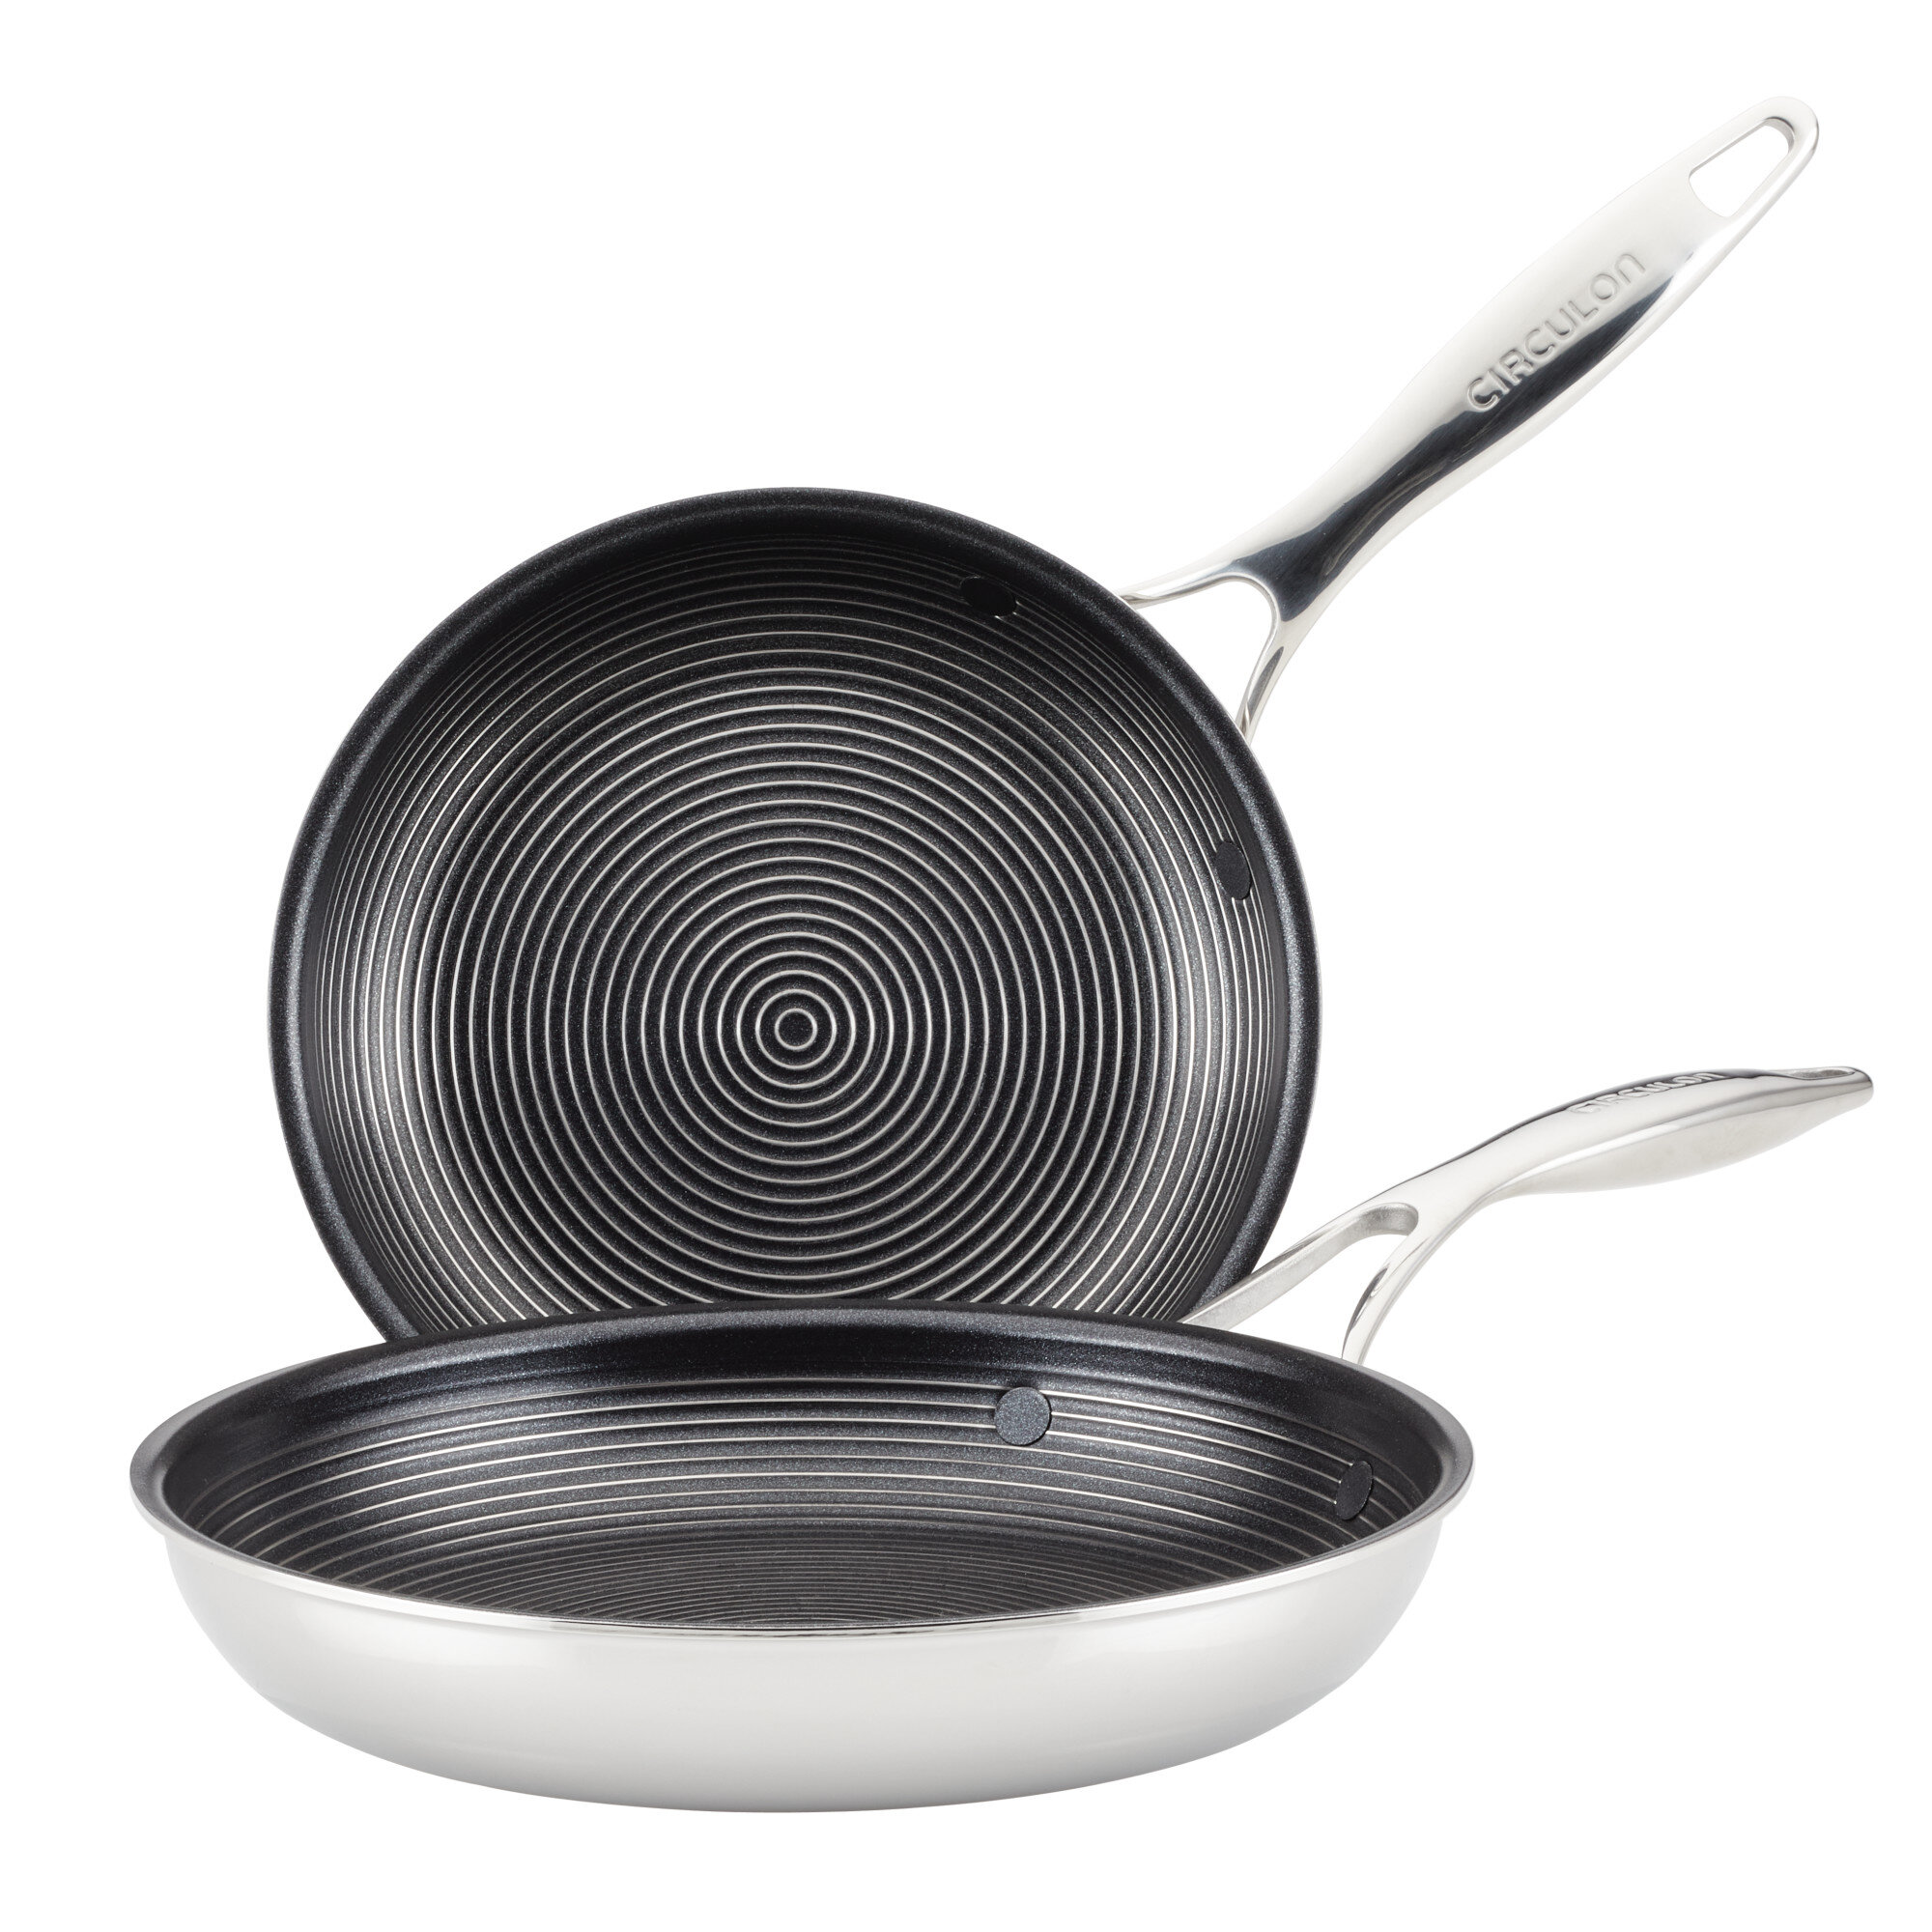 Circulon Clad Stainless Steel Frying Pan Set with Hybrid SteelShield Nonstick, 2-Piece